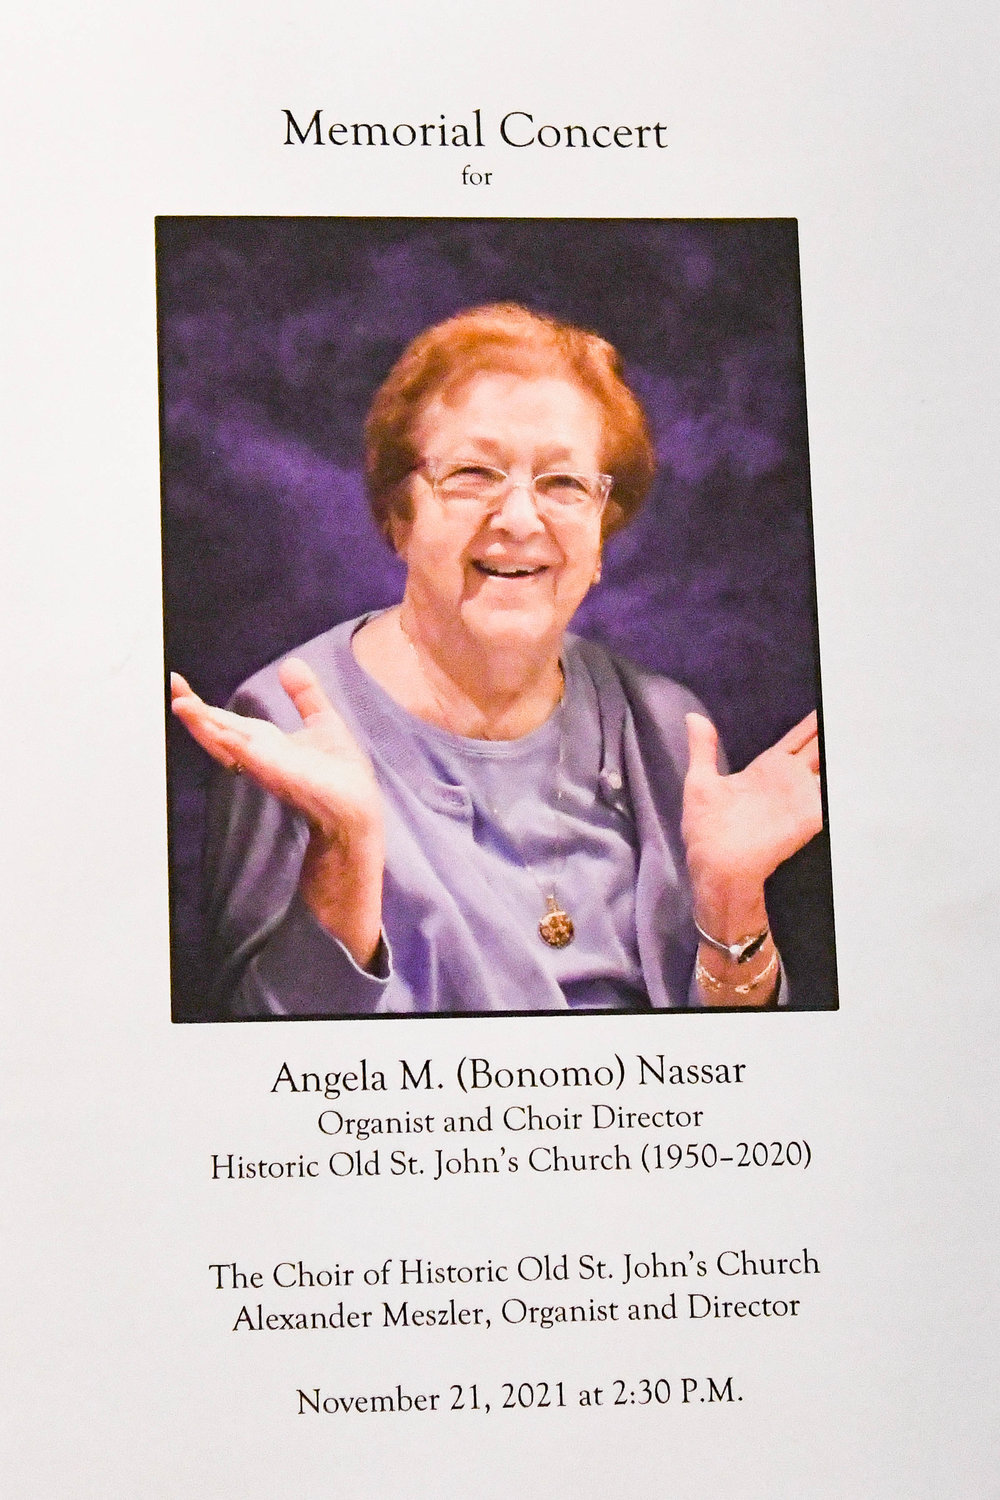 Angela Nassar, former organist and choir director at Historic Old St. John’s Church in Utica from 1950 until her death in 2020.